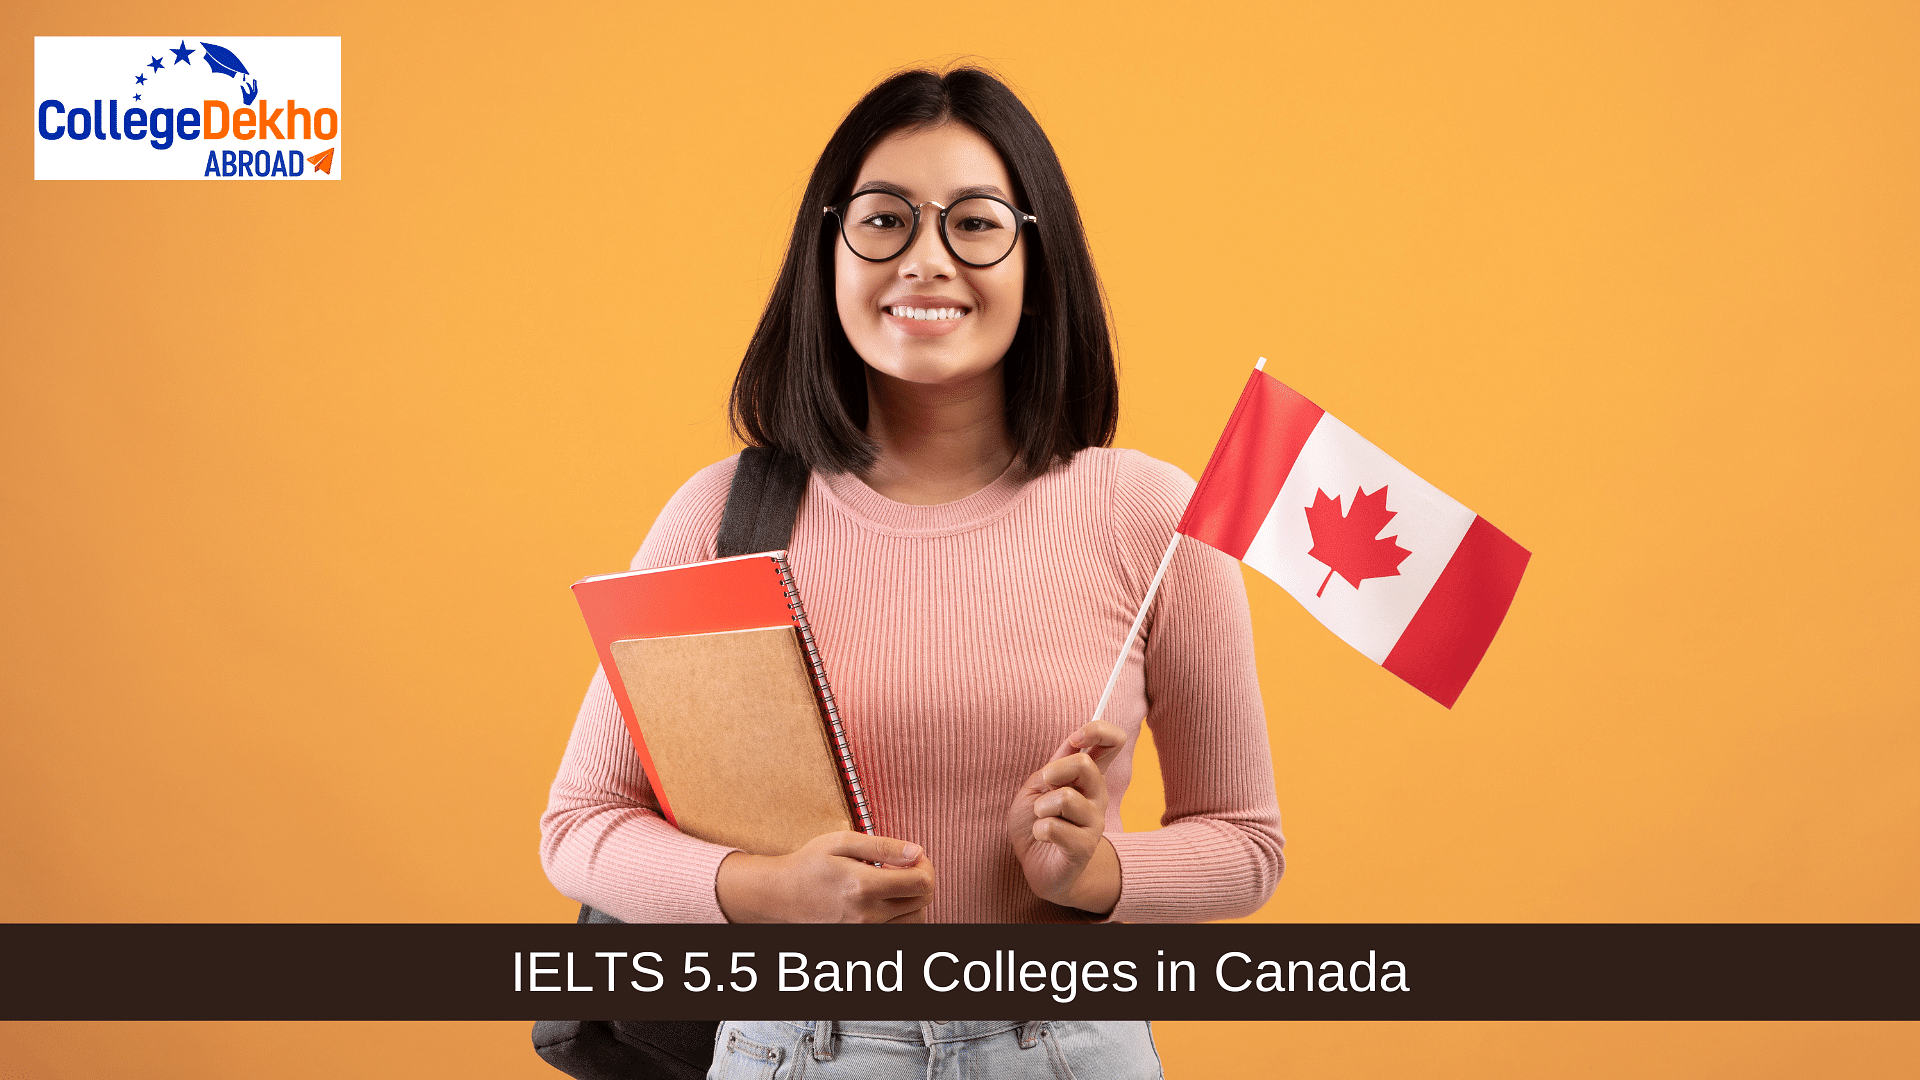 IELTS 5.5 Band Colleges in Canada